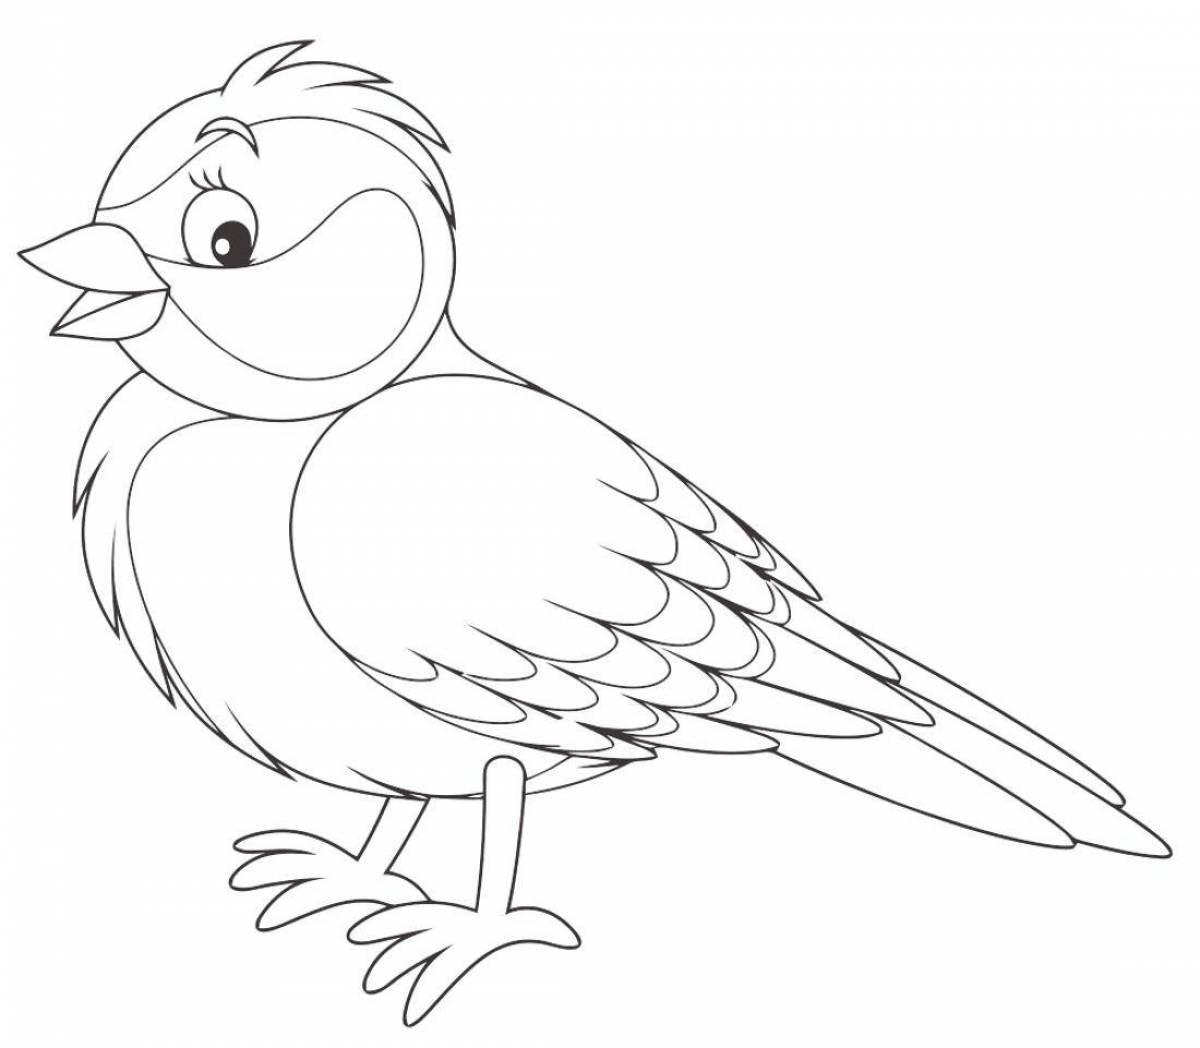 Animated tits coloring page for kids